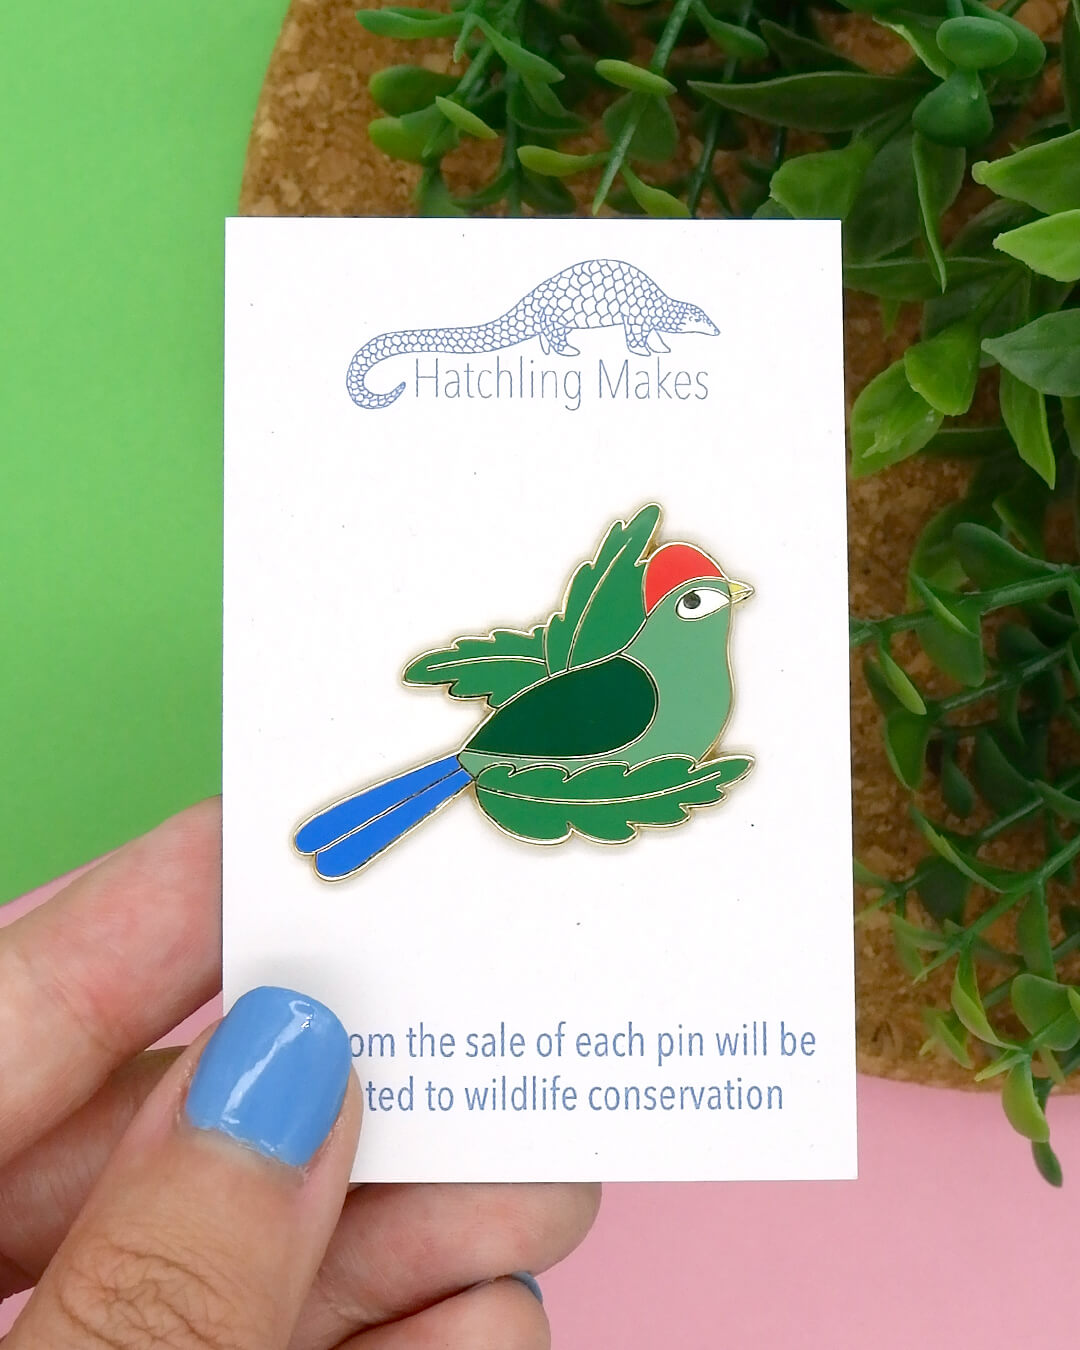 Red crested turaco hard enamel pin